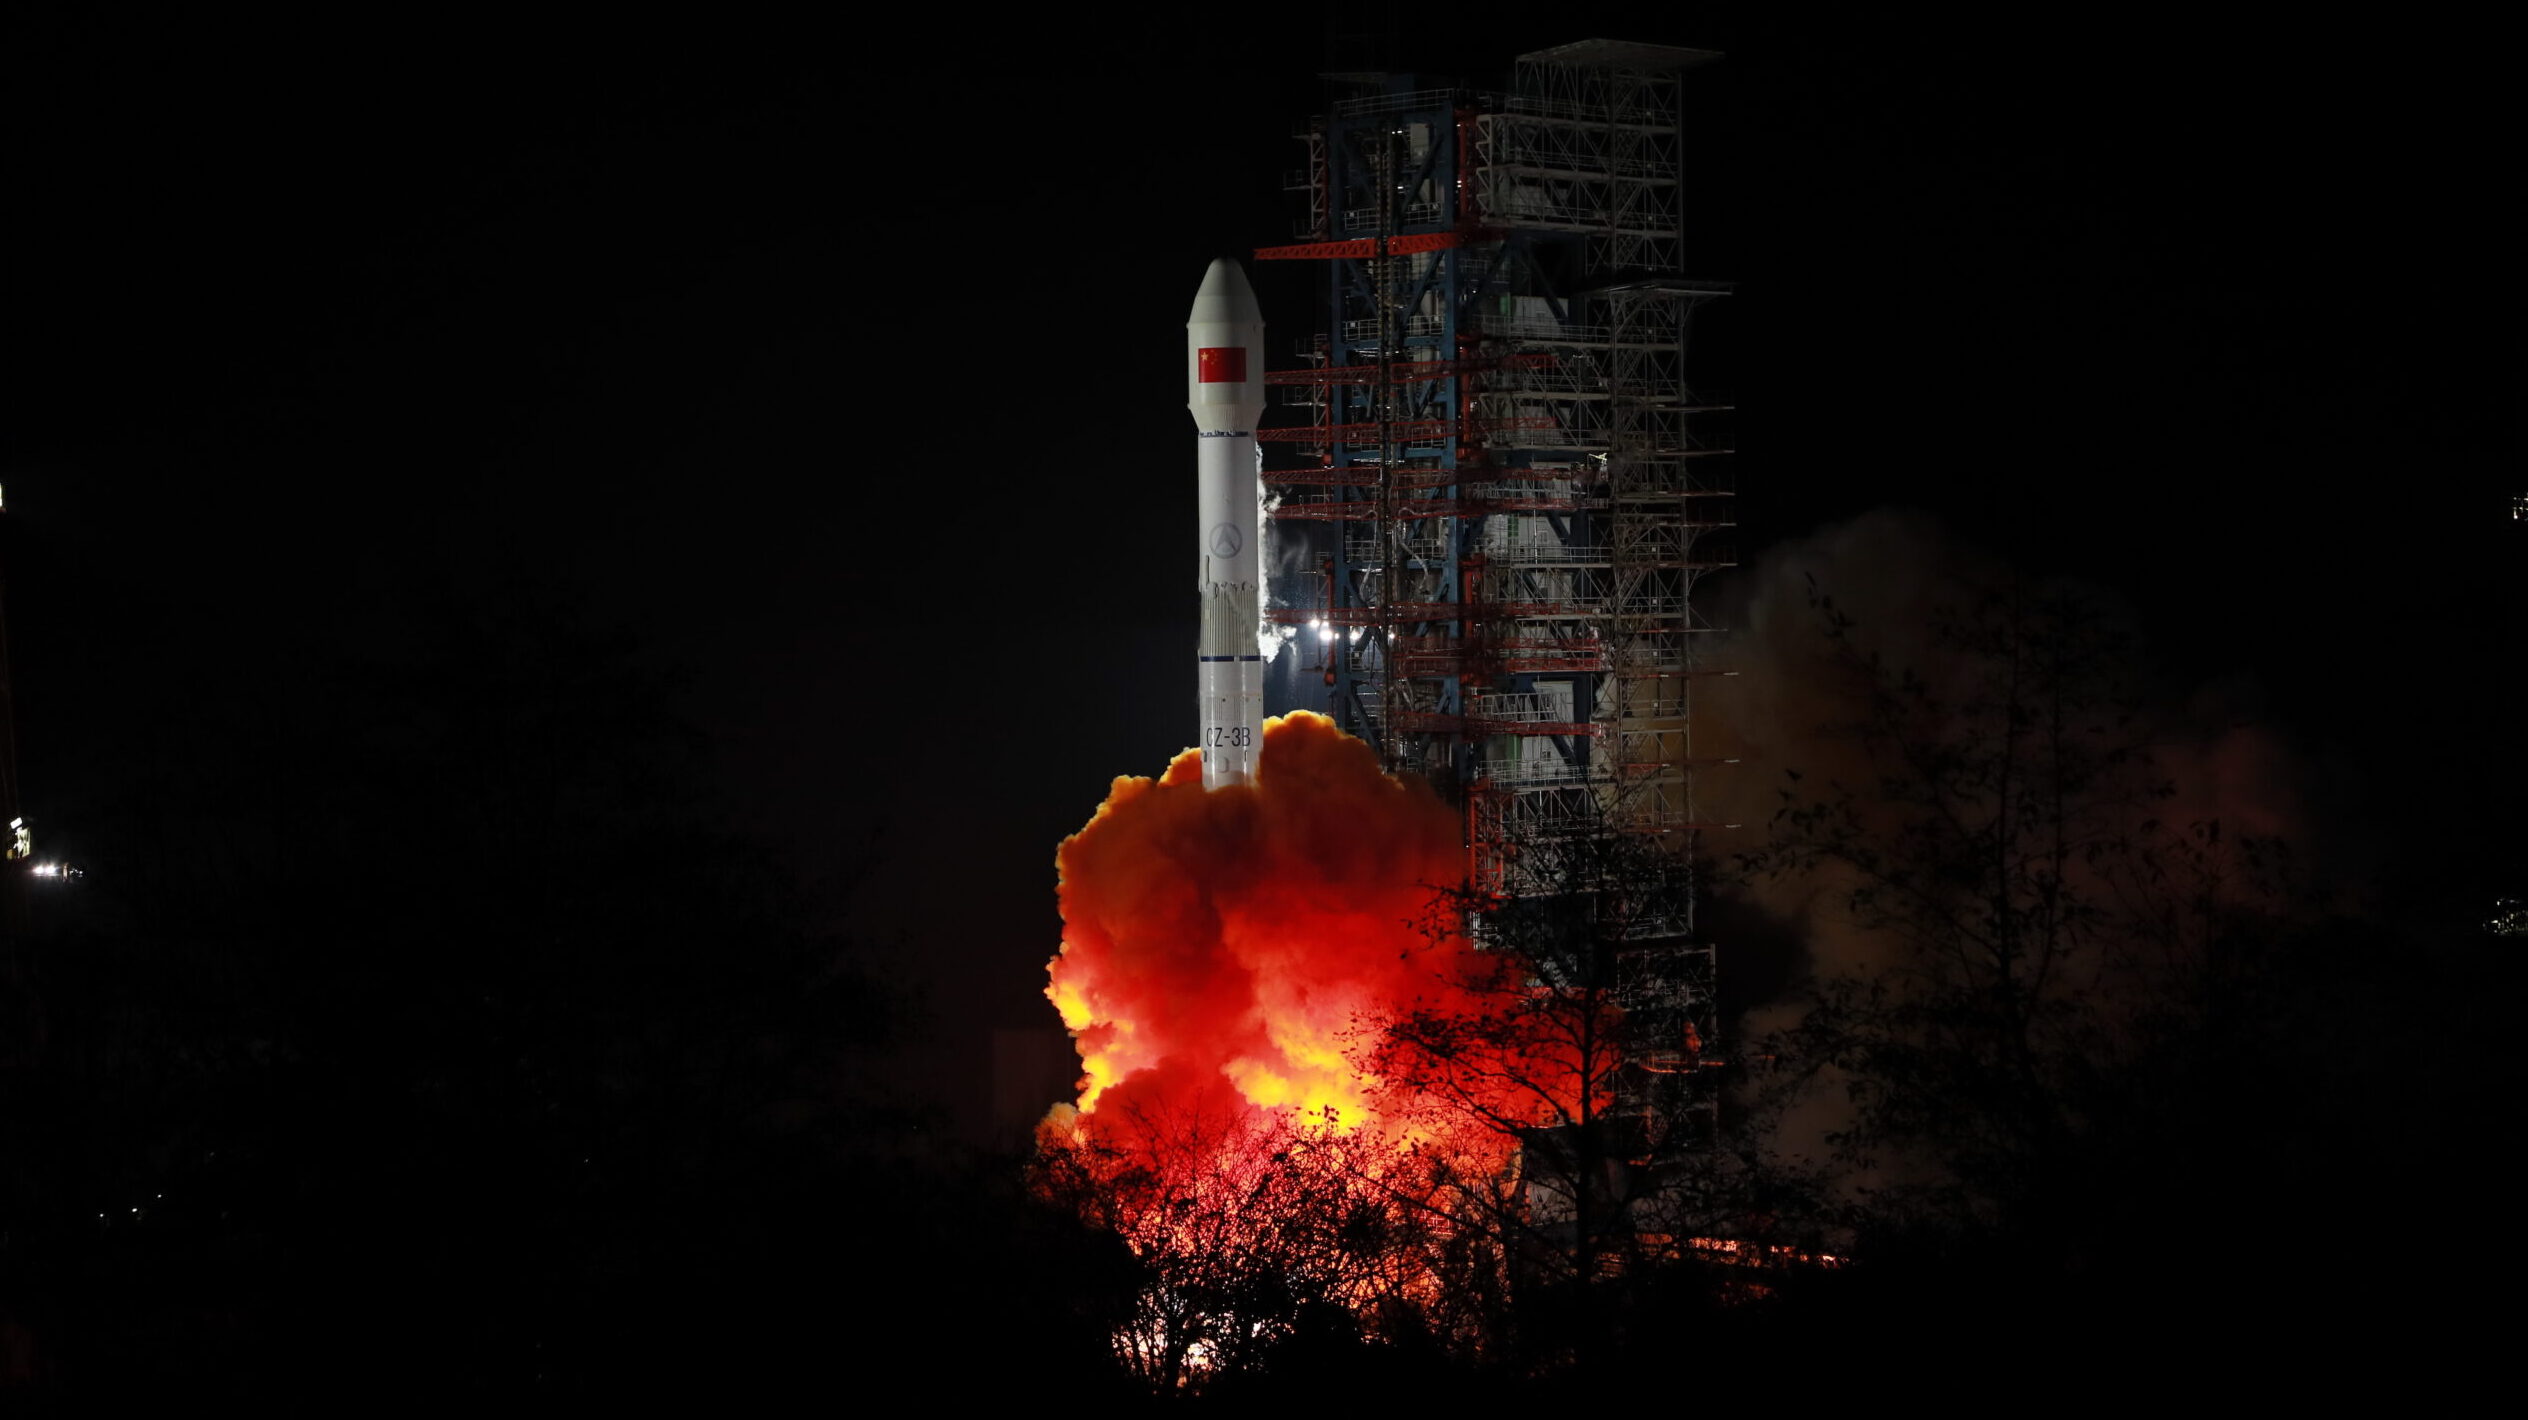 China’s rapid space launch advantage, and how the US can try to counter it